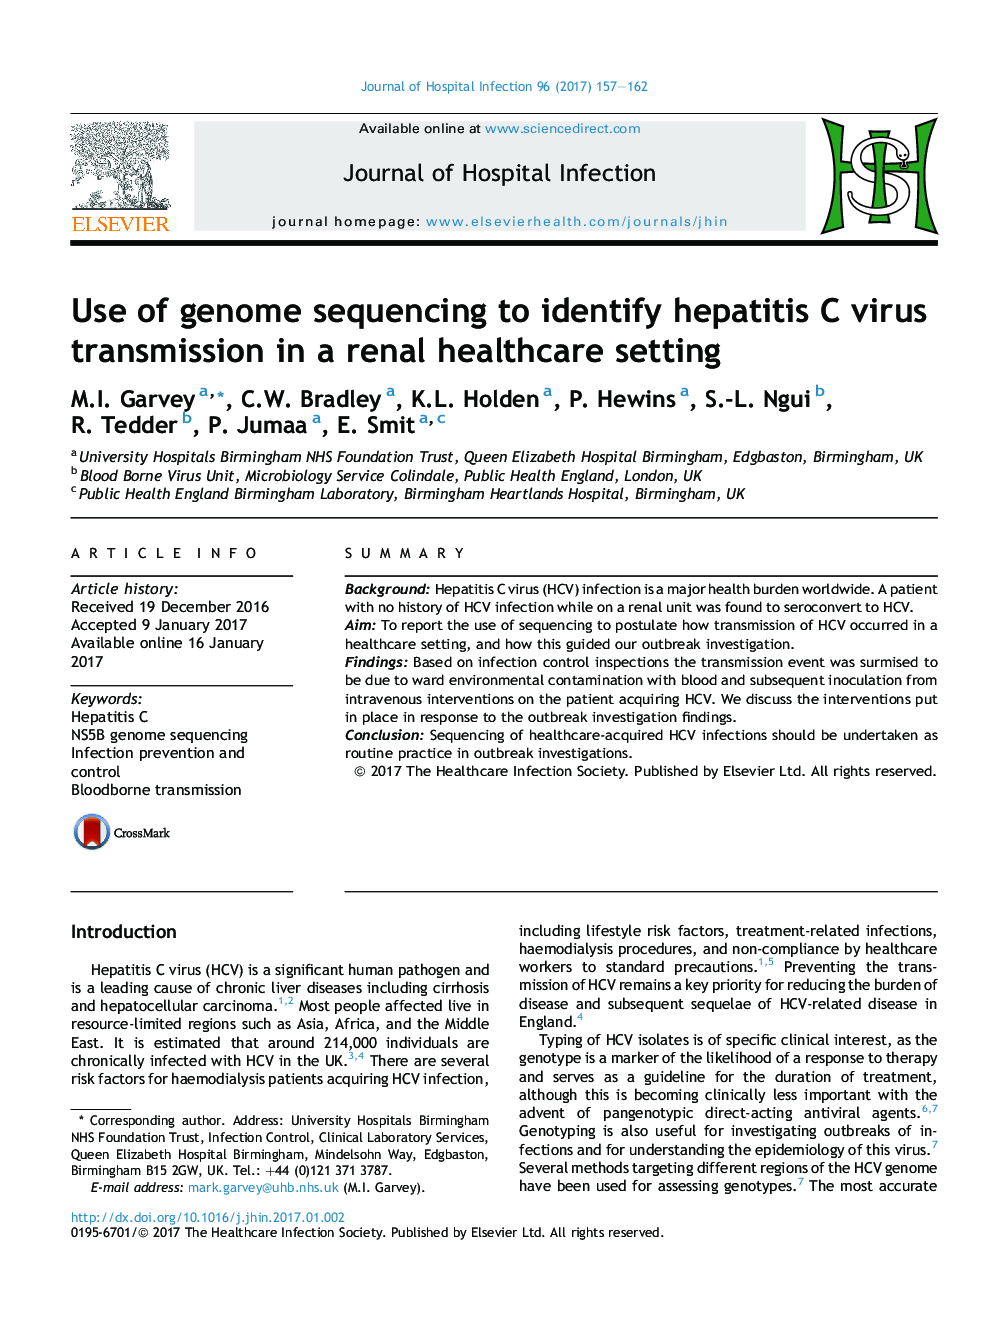 Use of genome sequencing to identify hepatitis C virus transmission in a renal healthcare setting